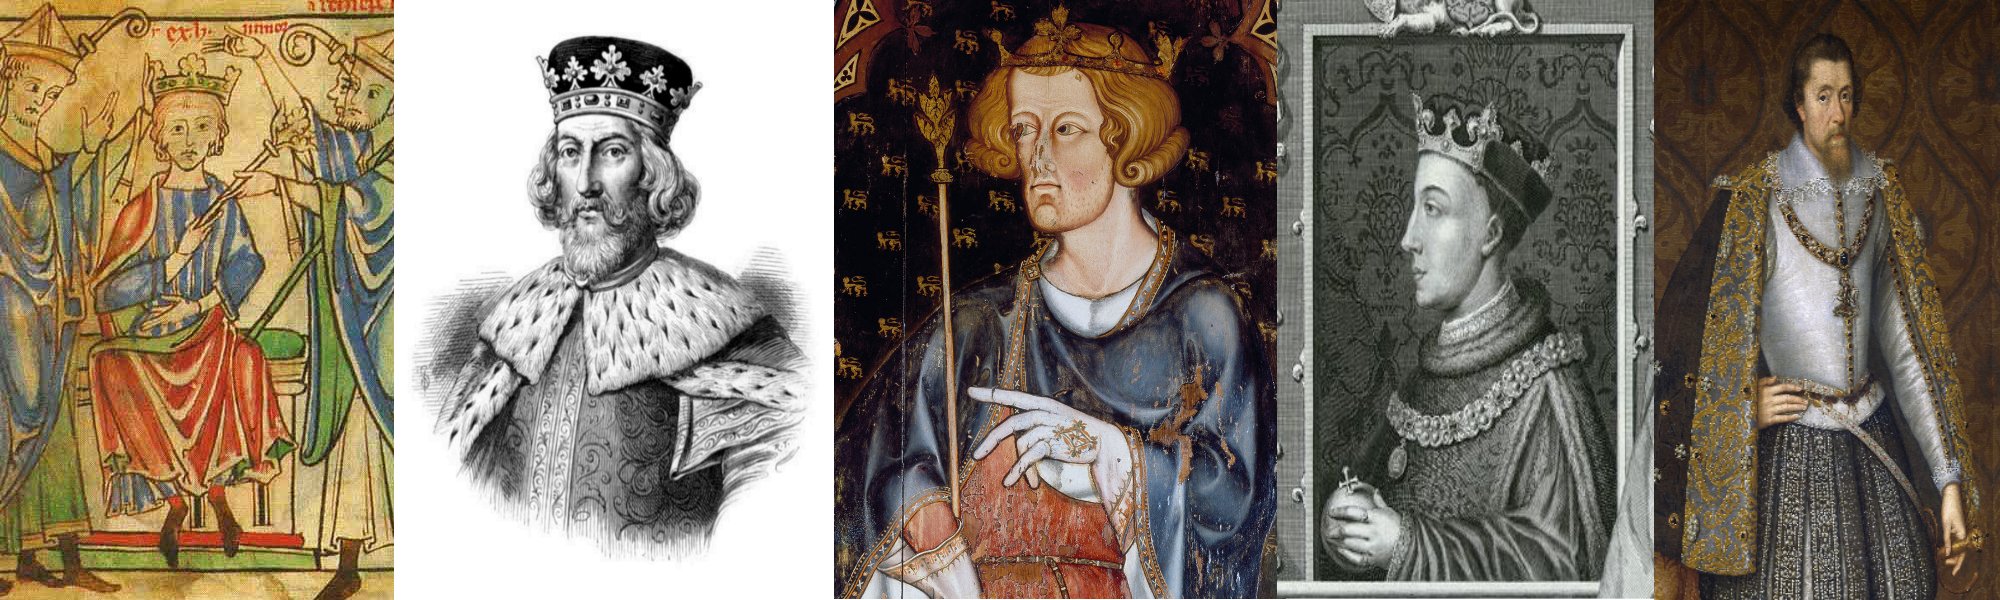 The dysentery Kings. From left to right. Henry the Young King, King John, Edward I, Henry V (Image courtesy of ancestryimages.com) and James VI